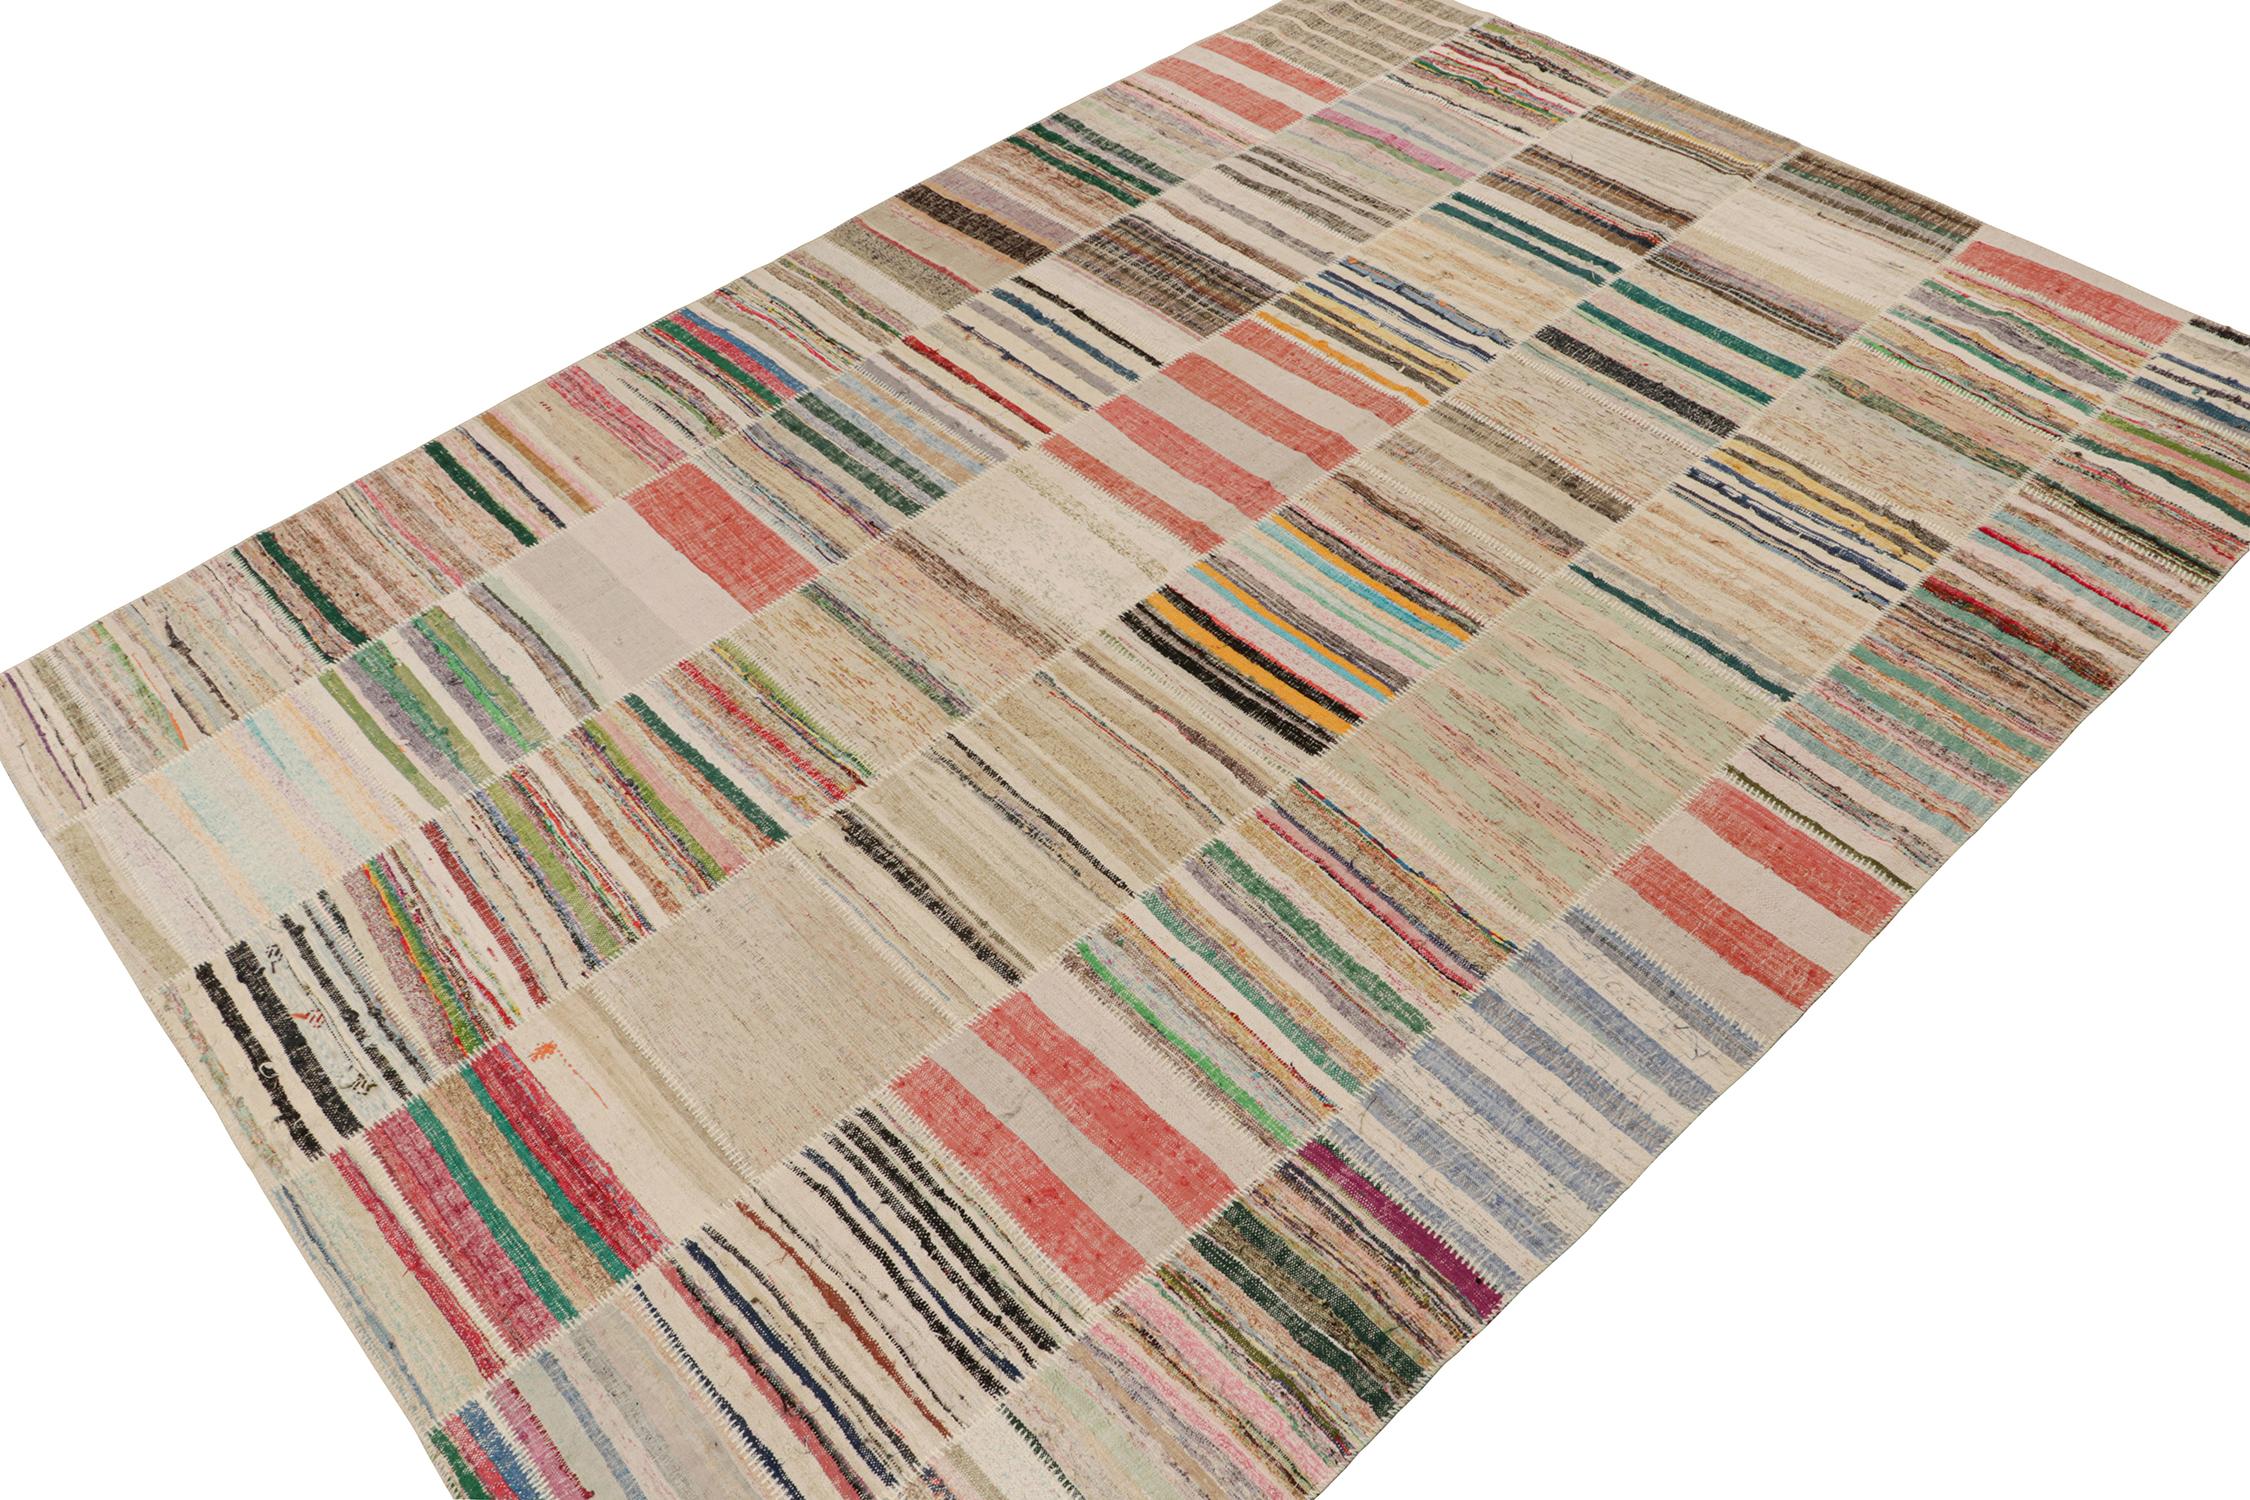 Rug & Kilim presents a contemporary 10x14 rug from their innovative new patchwork kilim collection. 

On the Design: 

This flat weave technique repurposes vintage yarns in polychromatic stripes and striae, achieving a playful look with fabulous